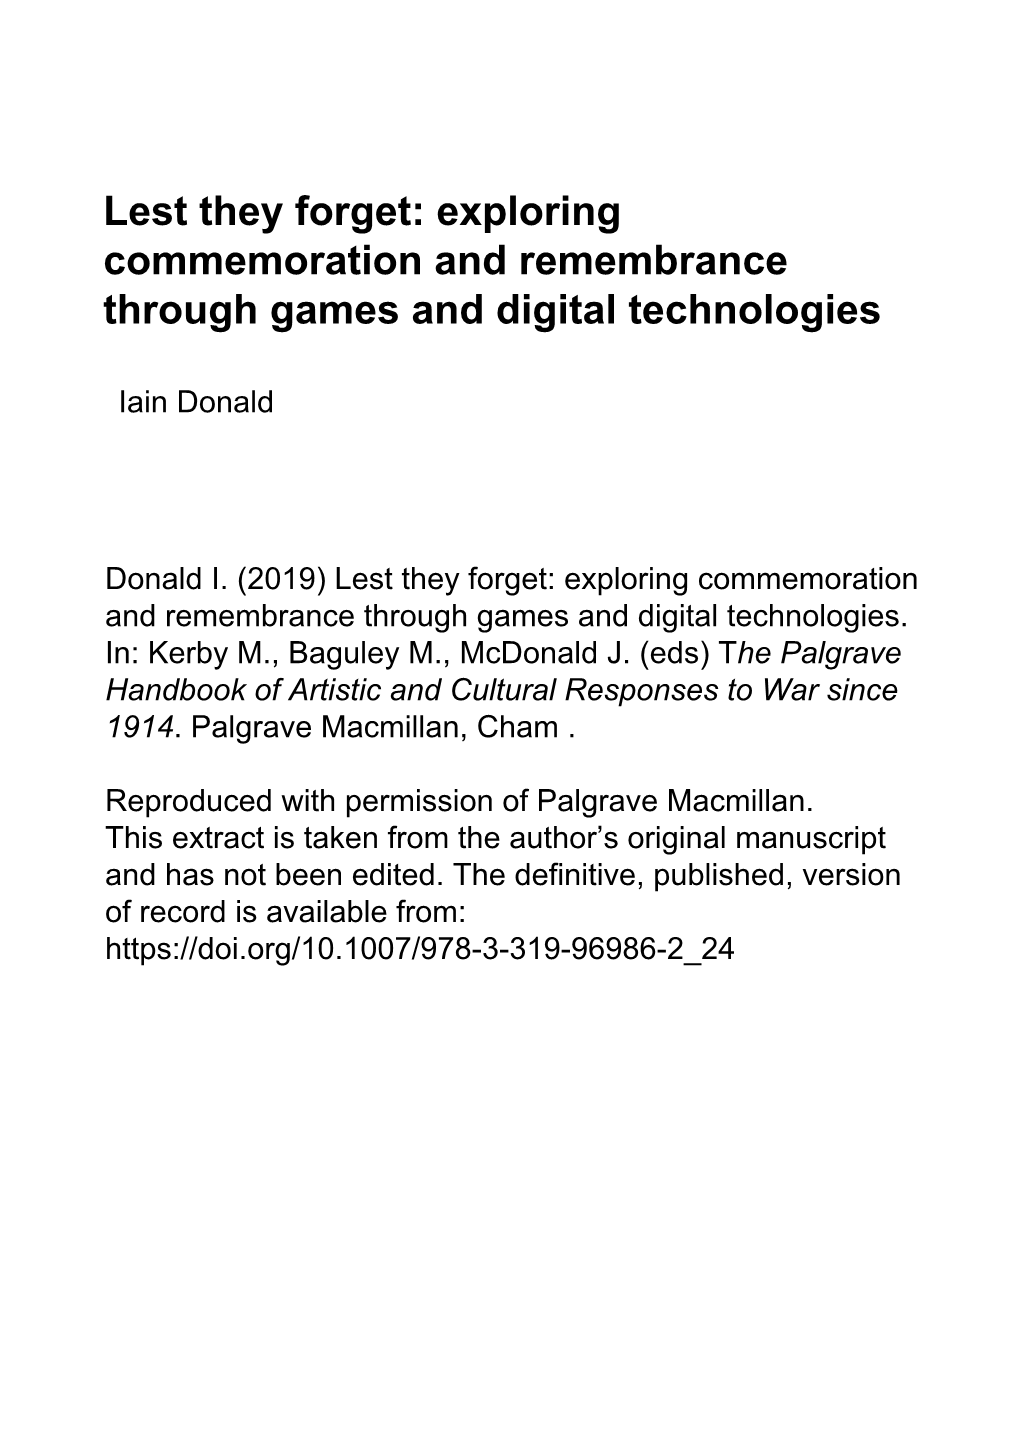 Lest They Forget: Exploring Commemoration and Remembrance Through Games and Digital Technologies